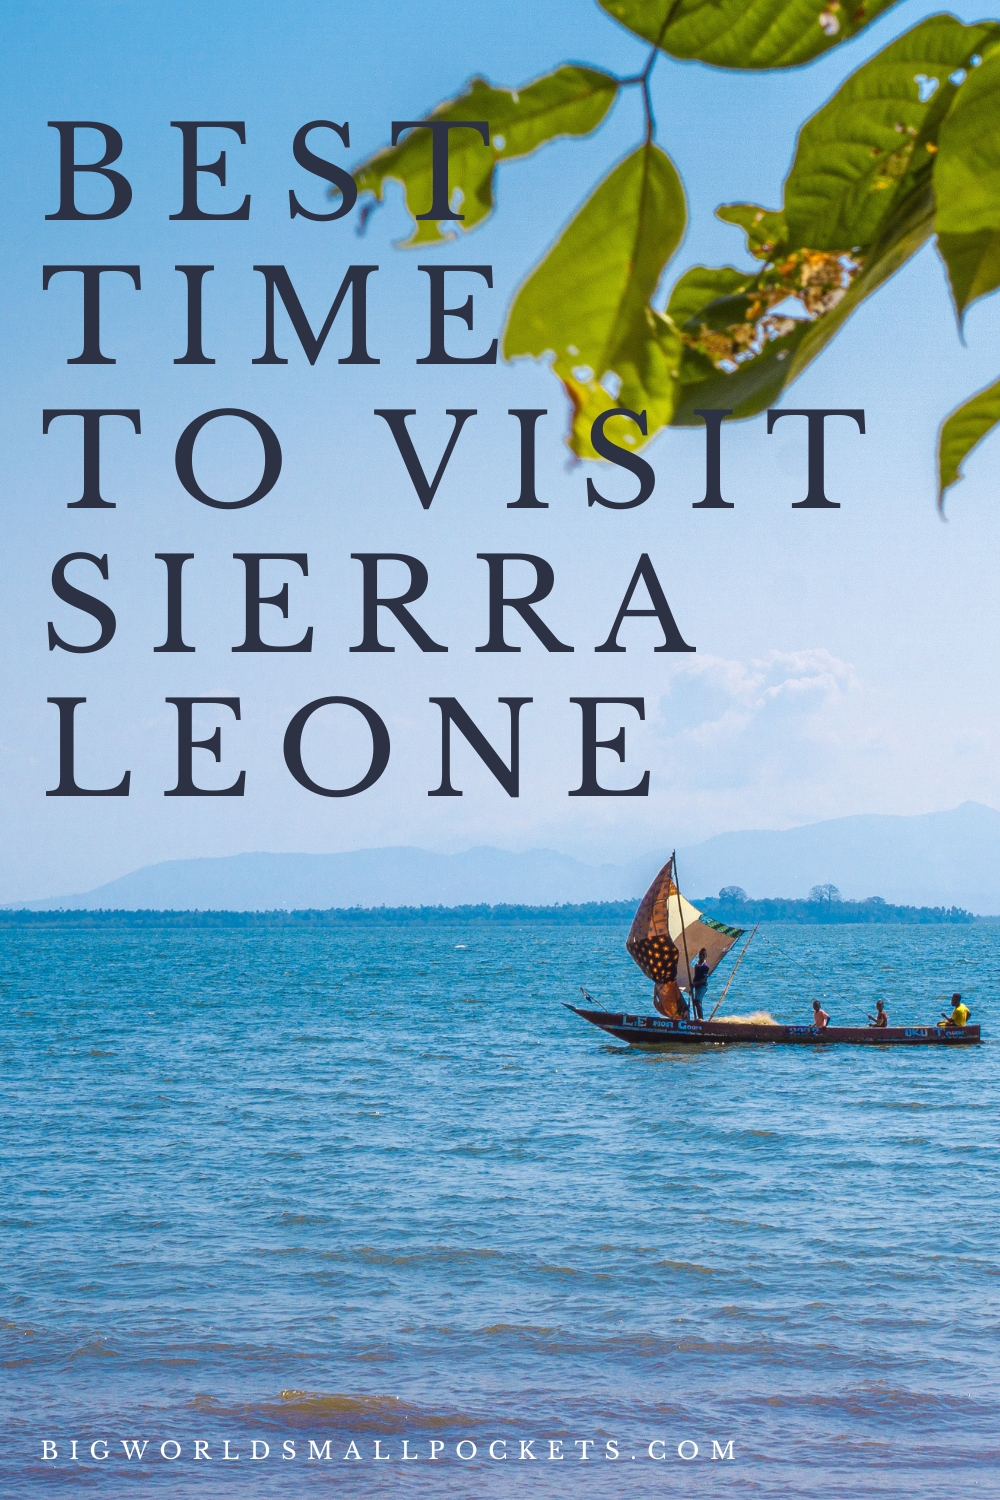 The Best Time to Visit Sierra Leone